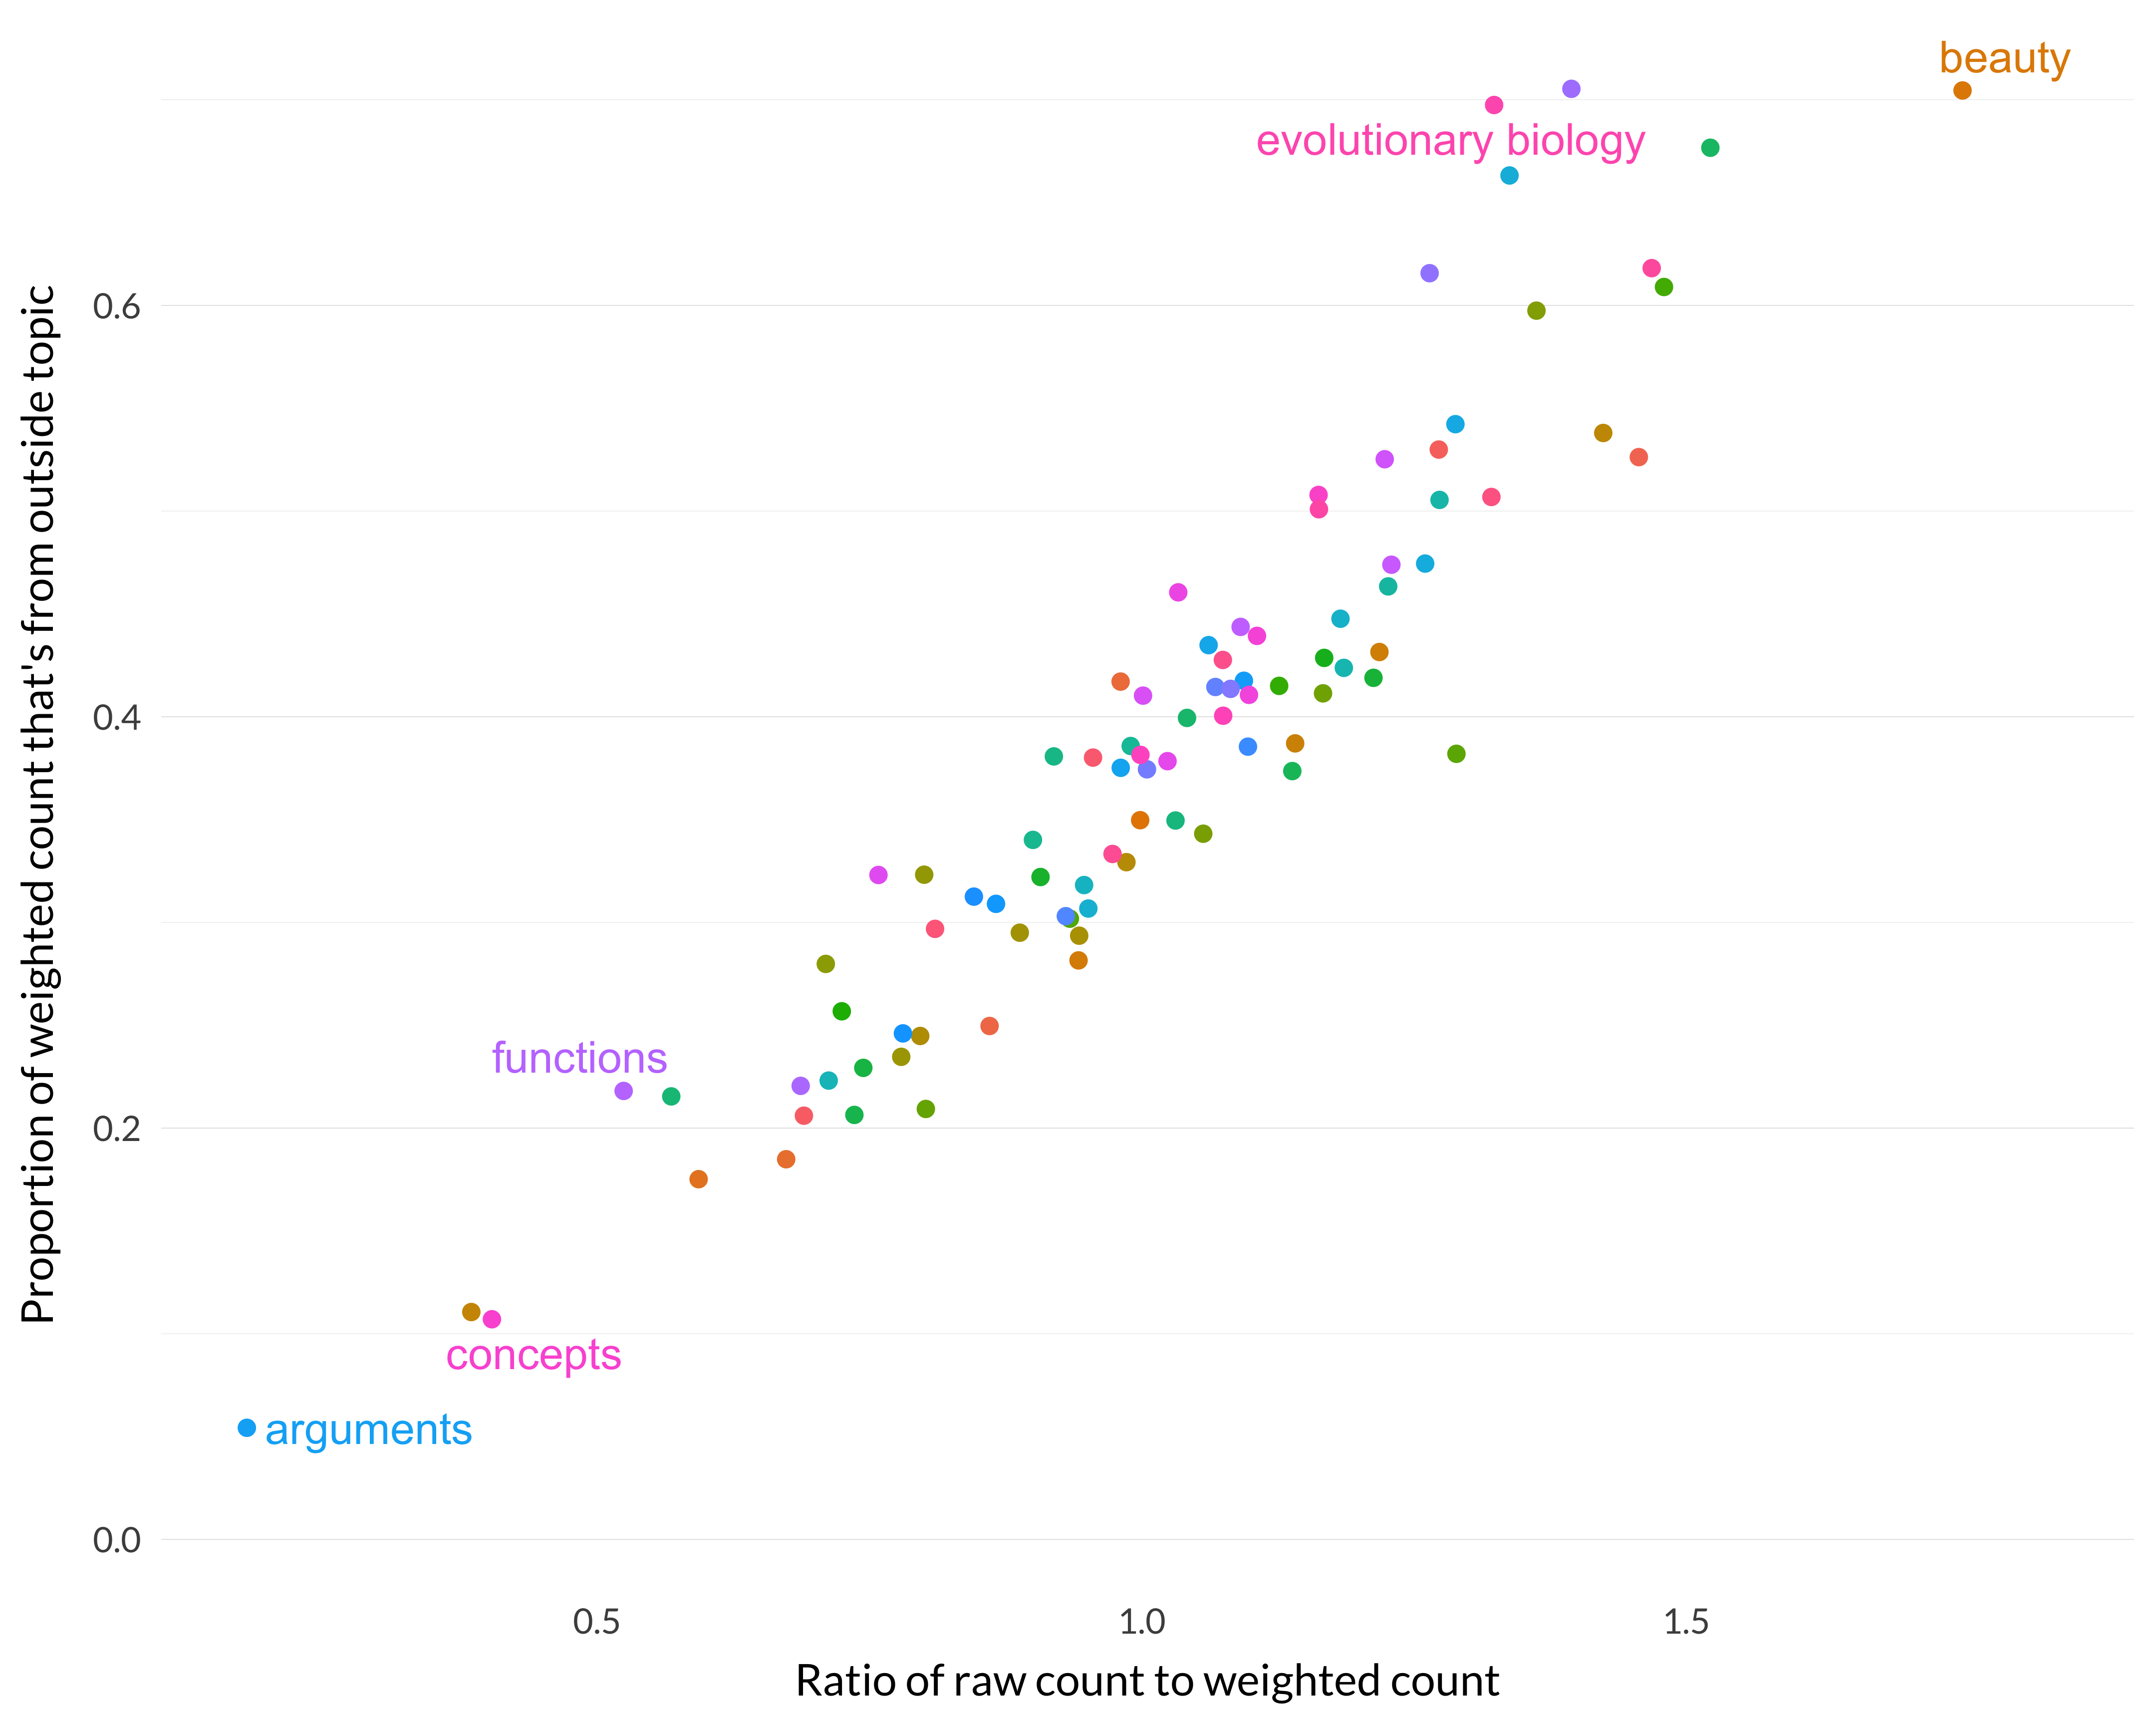 A scatterplot comparing the ratio of raw count to weighted count (r/w) to the proportion of weighted count that's from outside the topic (rp/w); i.e., comparing the first and third specializaiton measures. The two measures are well-correlated.